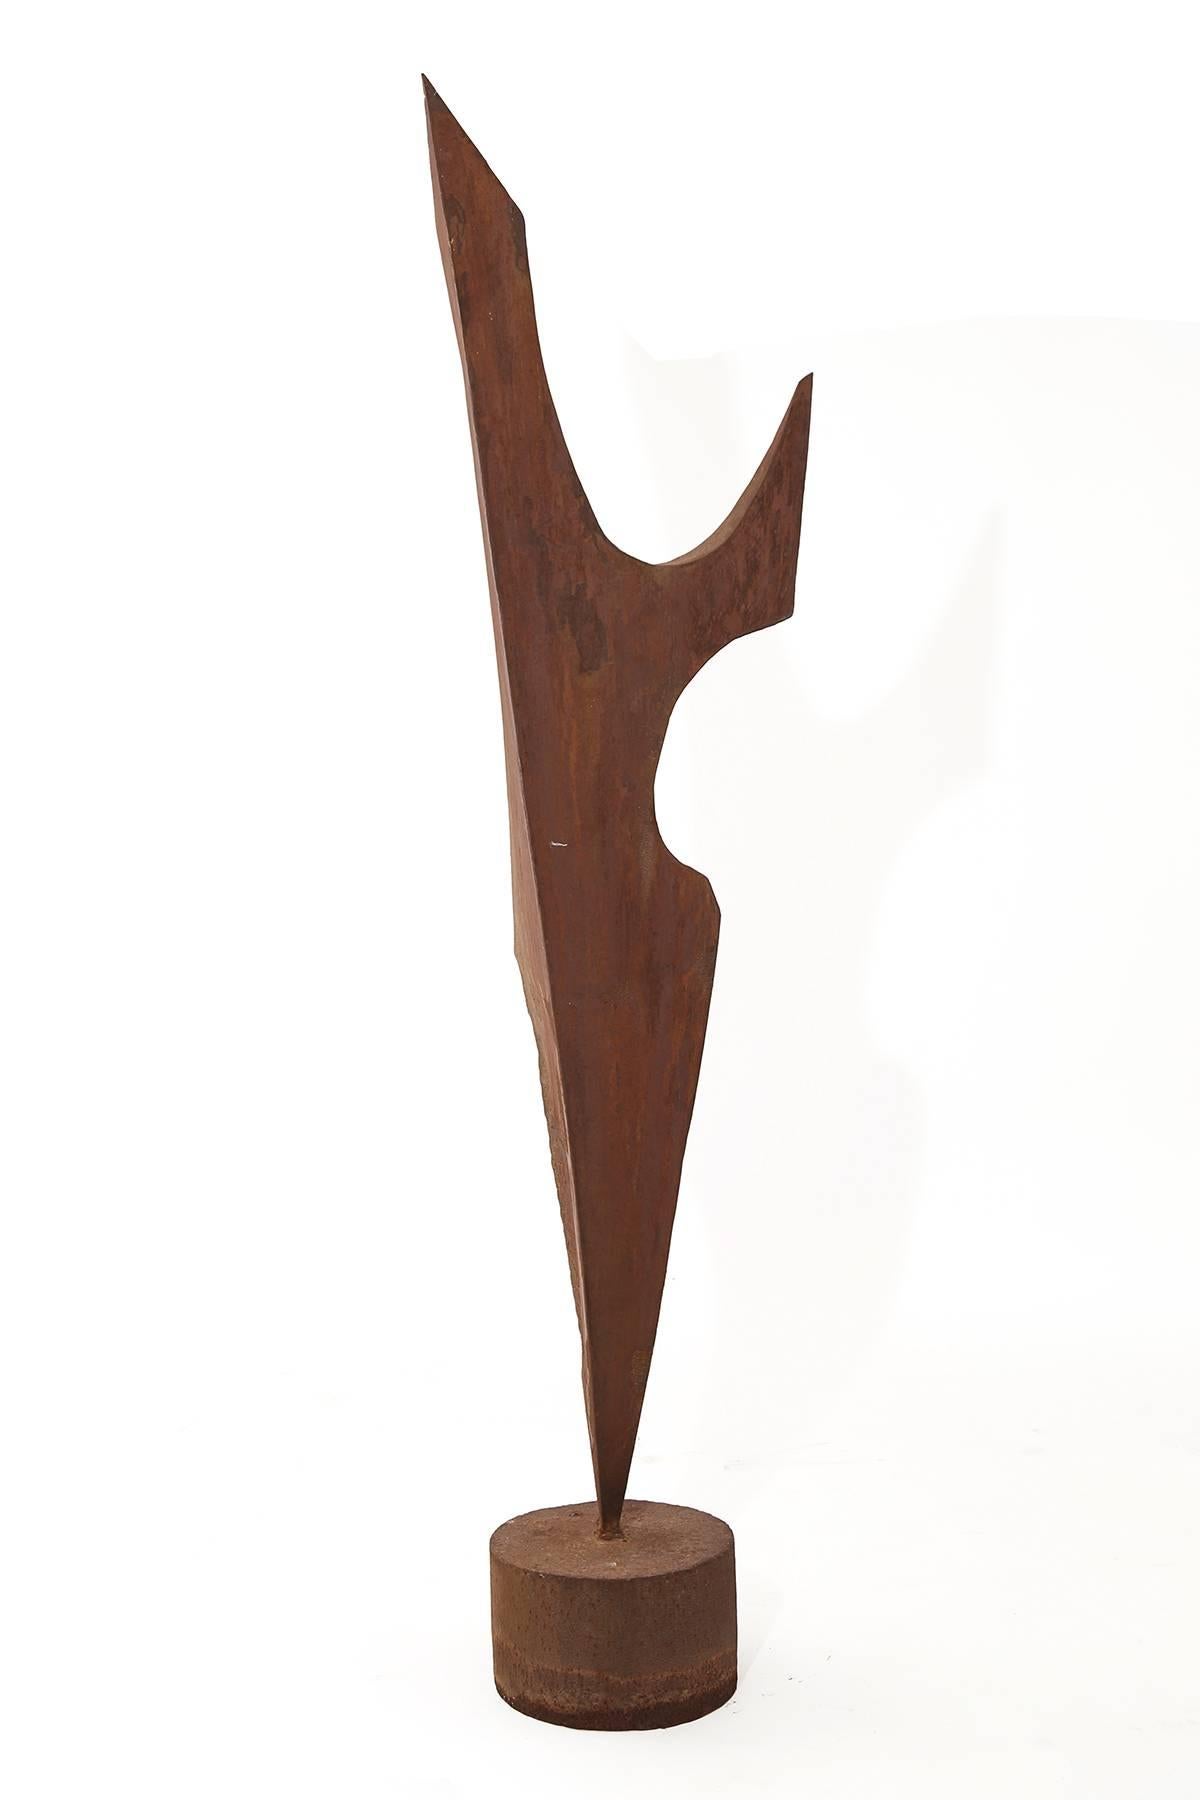 Monumental patinated steel sculpture by Schmidt, circa 1974. This signed fabulous example looks fantastic from all sides and can be used indoors or out.